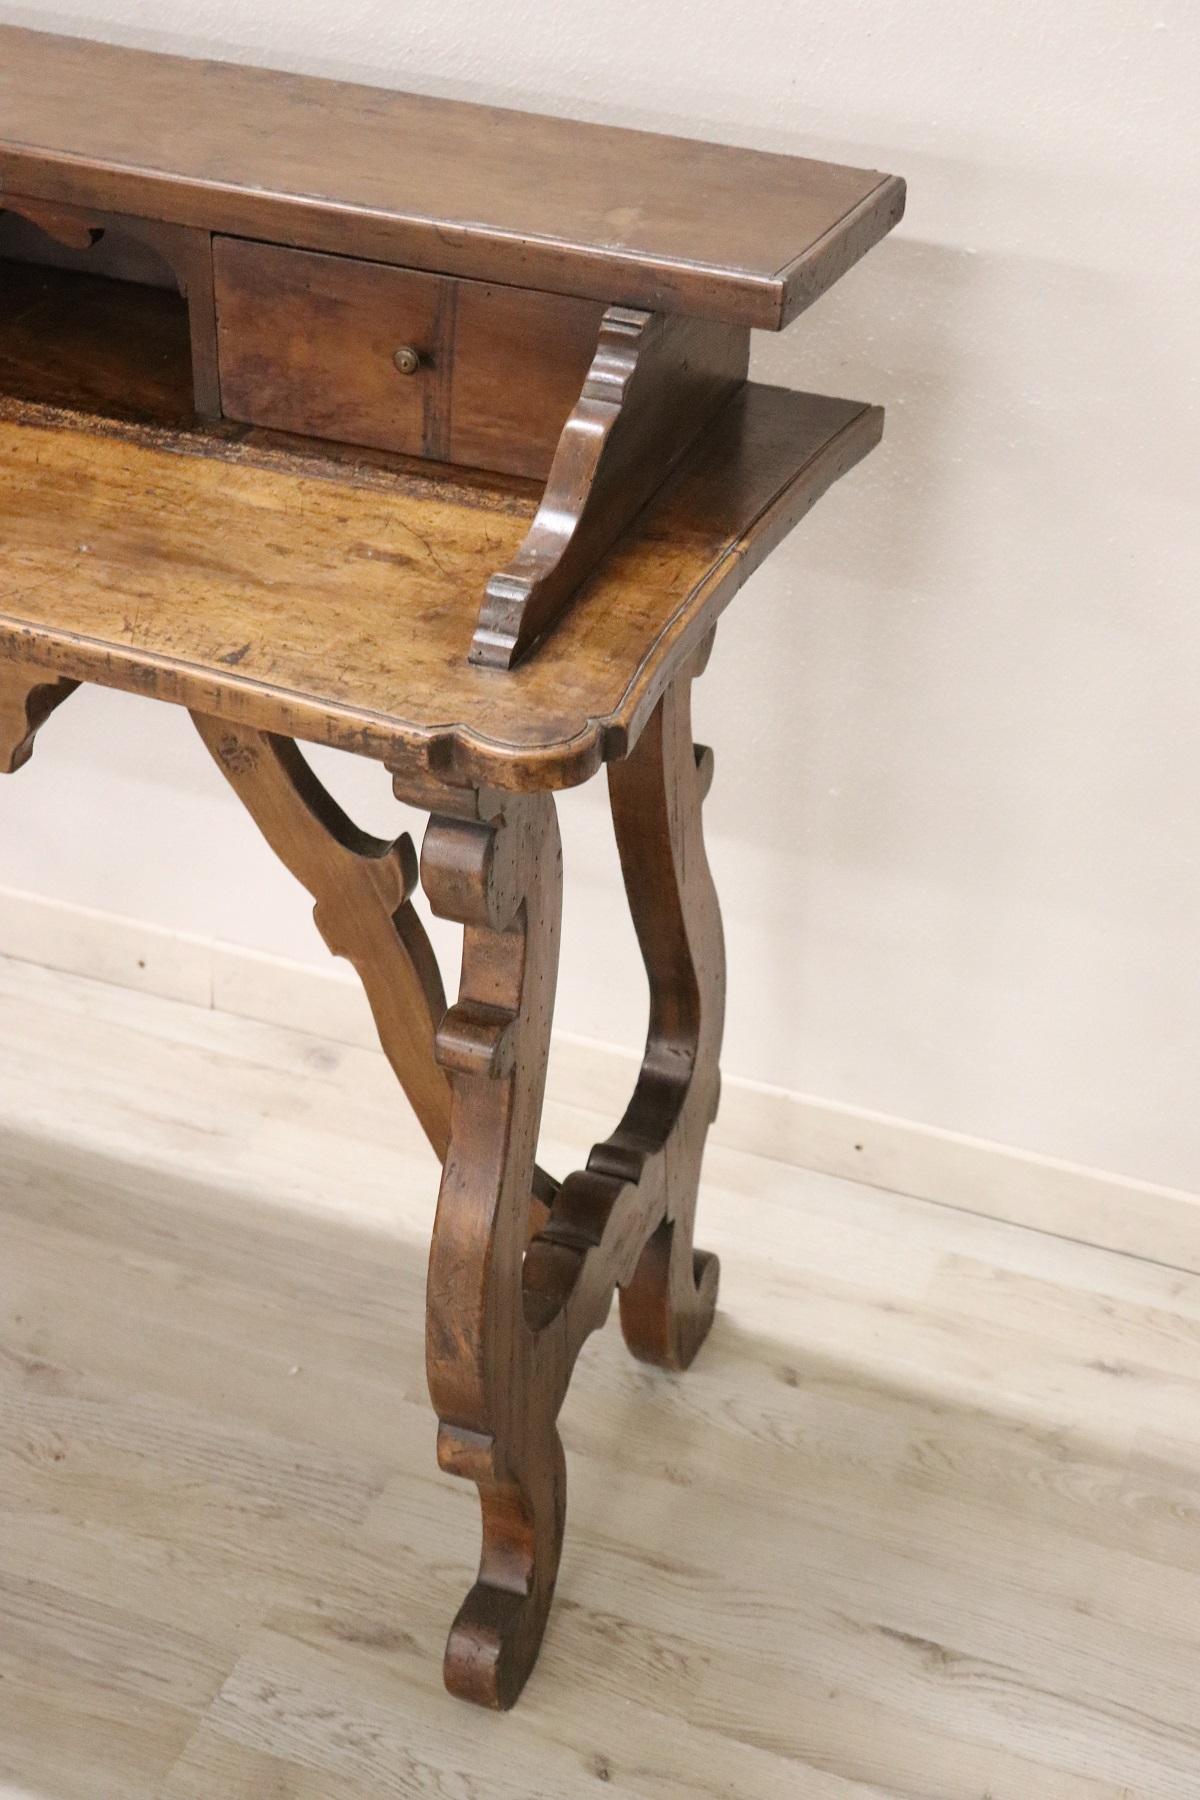 Elegant and essential antique Italian writing desk. 19th century Renaissance style period with classic Lyre legs. On the front it has 3 useful drawers. Rare and precious walnut. The back of the desk is rough because it is designed to be placed